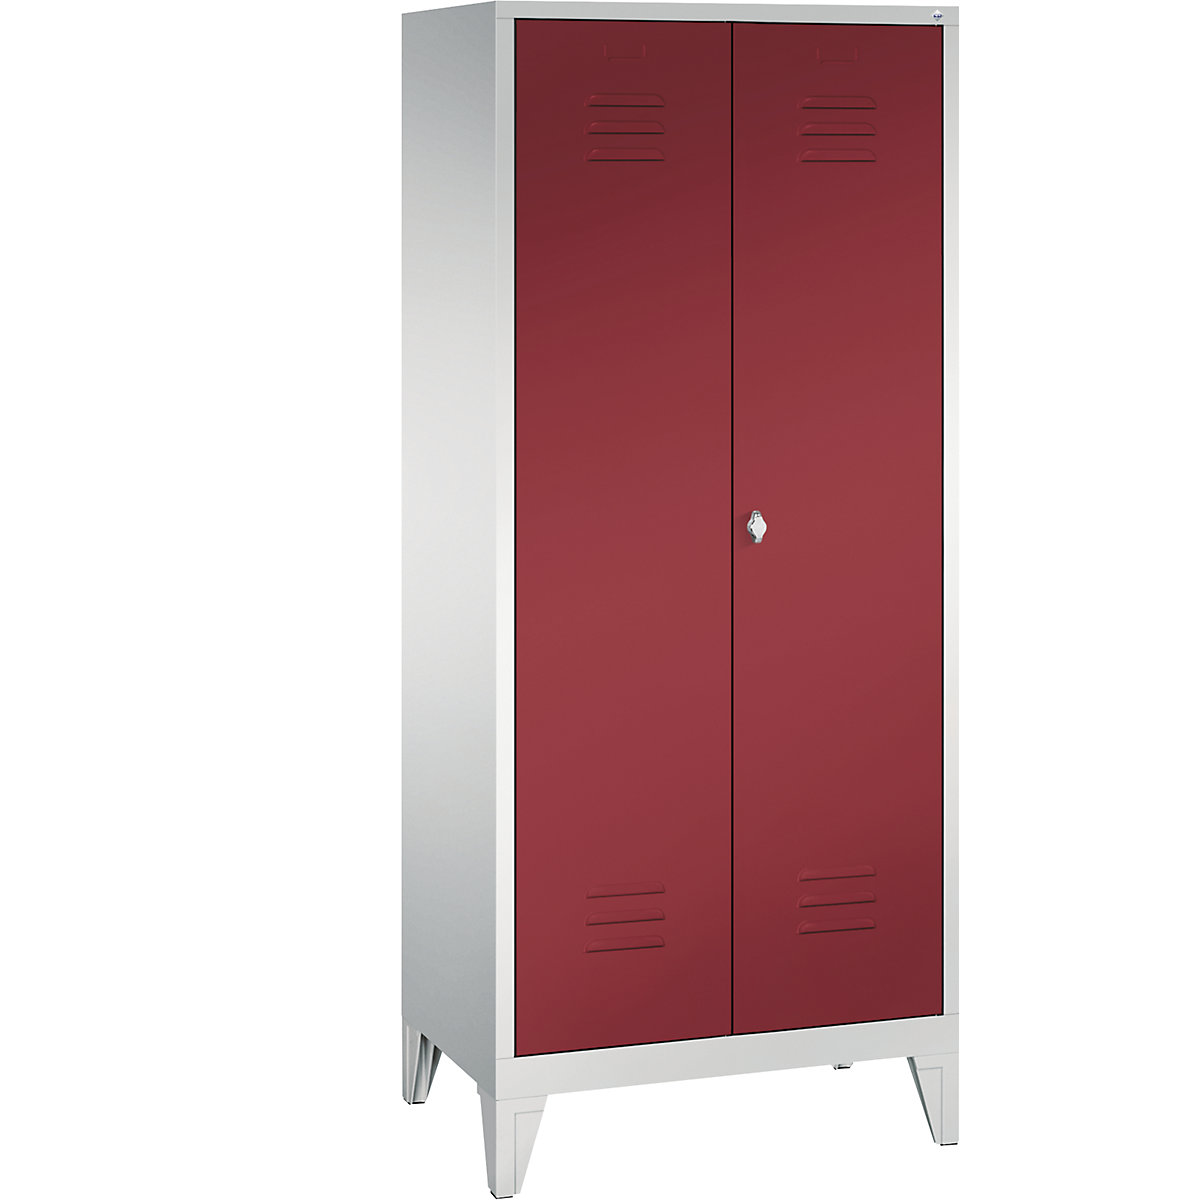 CLASSIC storage cupboard with feet, doors close in the middle – C+P, 2 compartments, compartment width 400 mm, light grey / ruby red-11